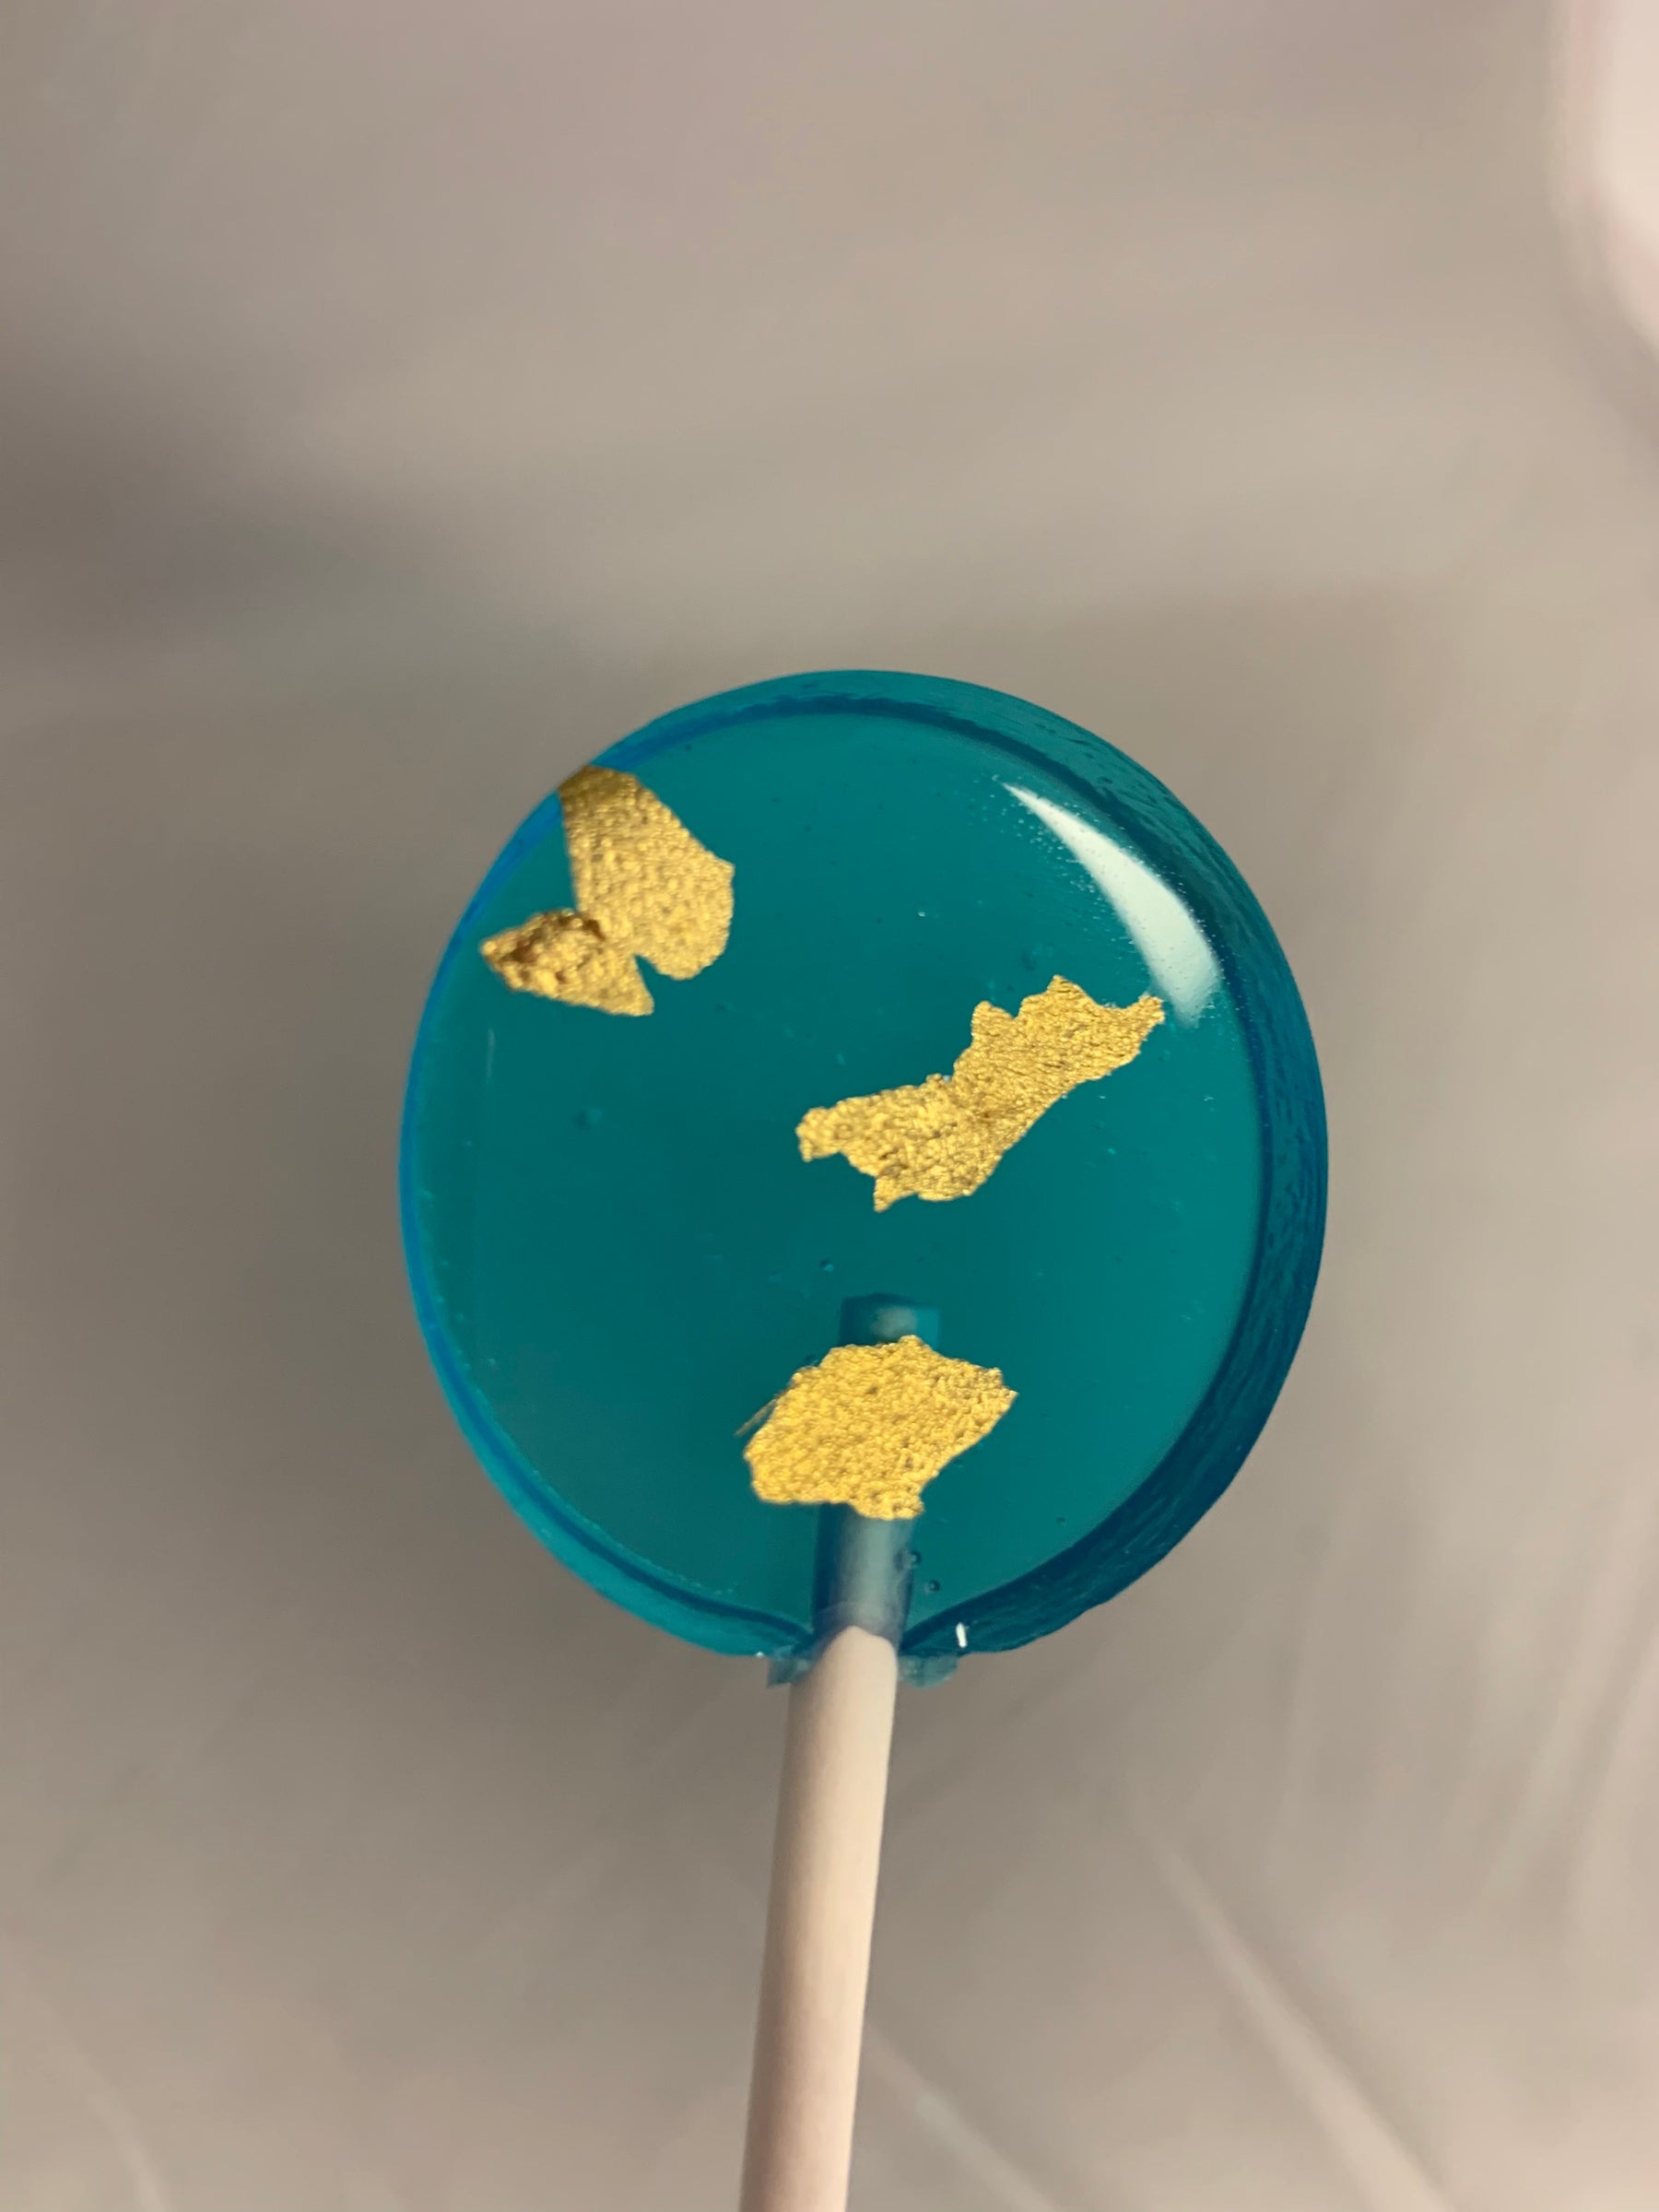 Wedding Size Hard Candy Lollipops with 24K Edible Gold Leaf